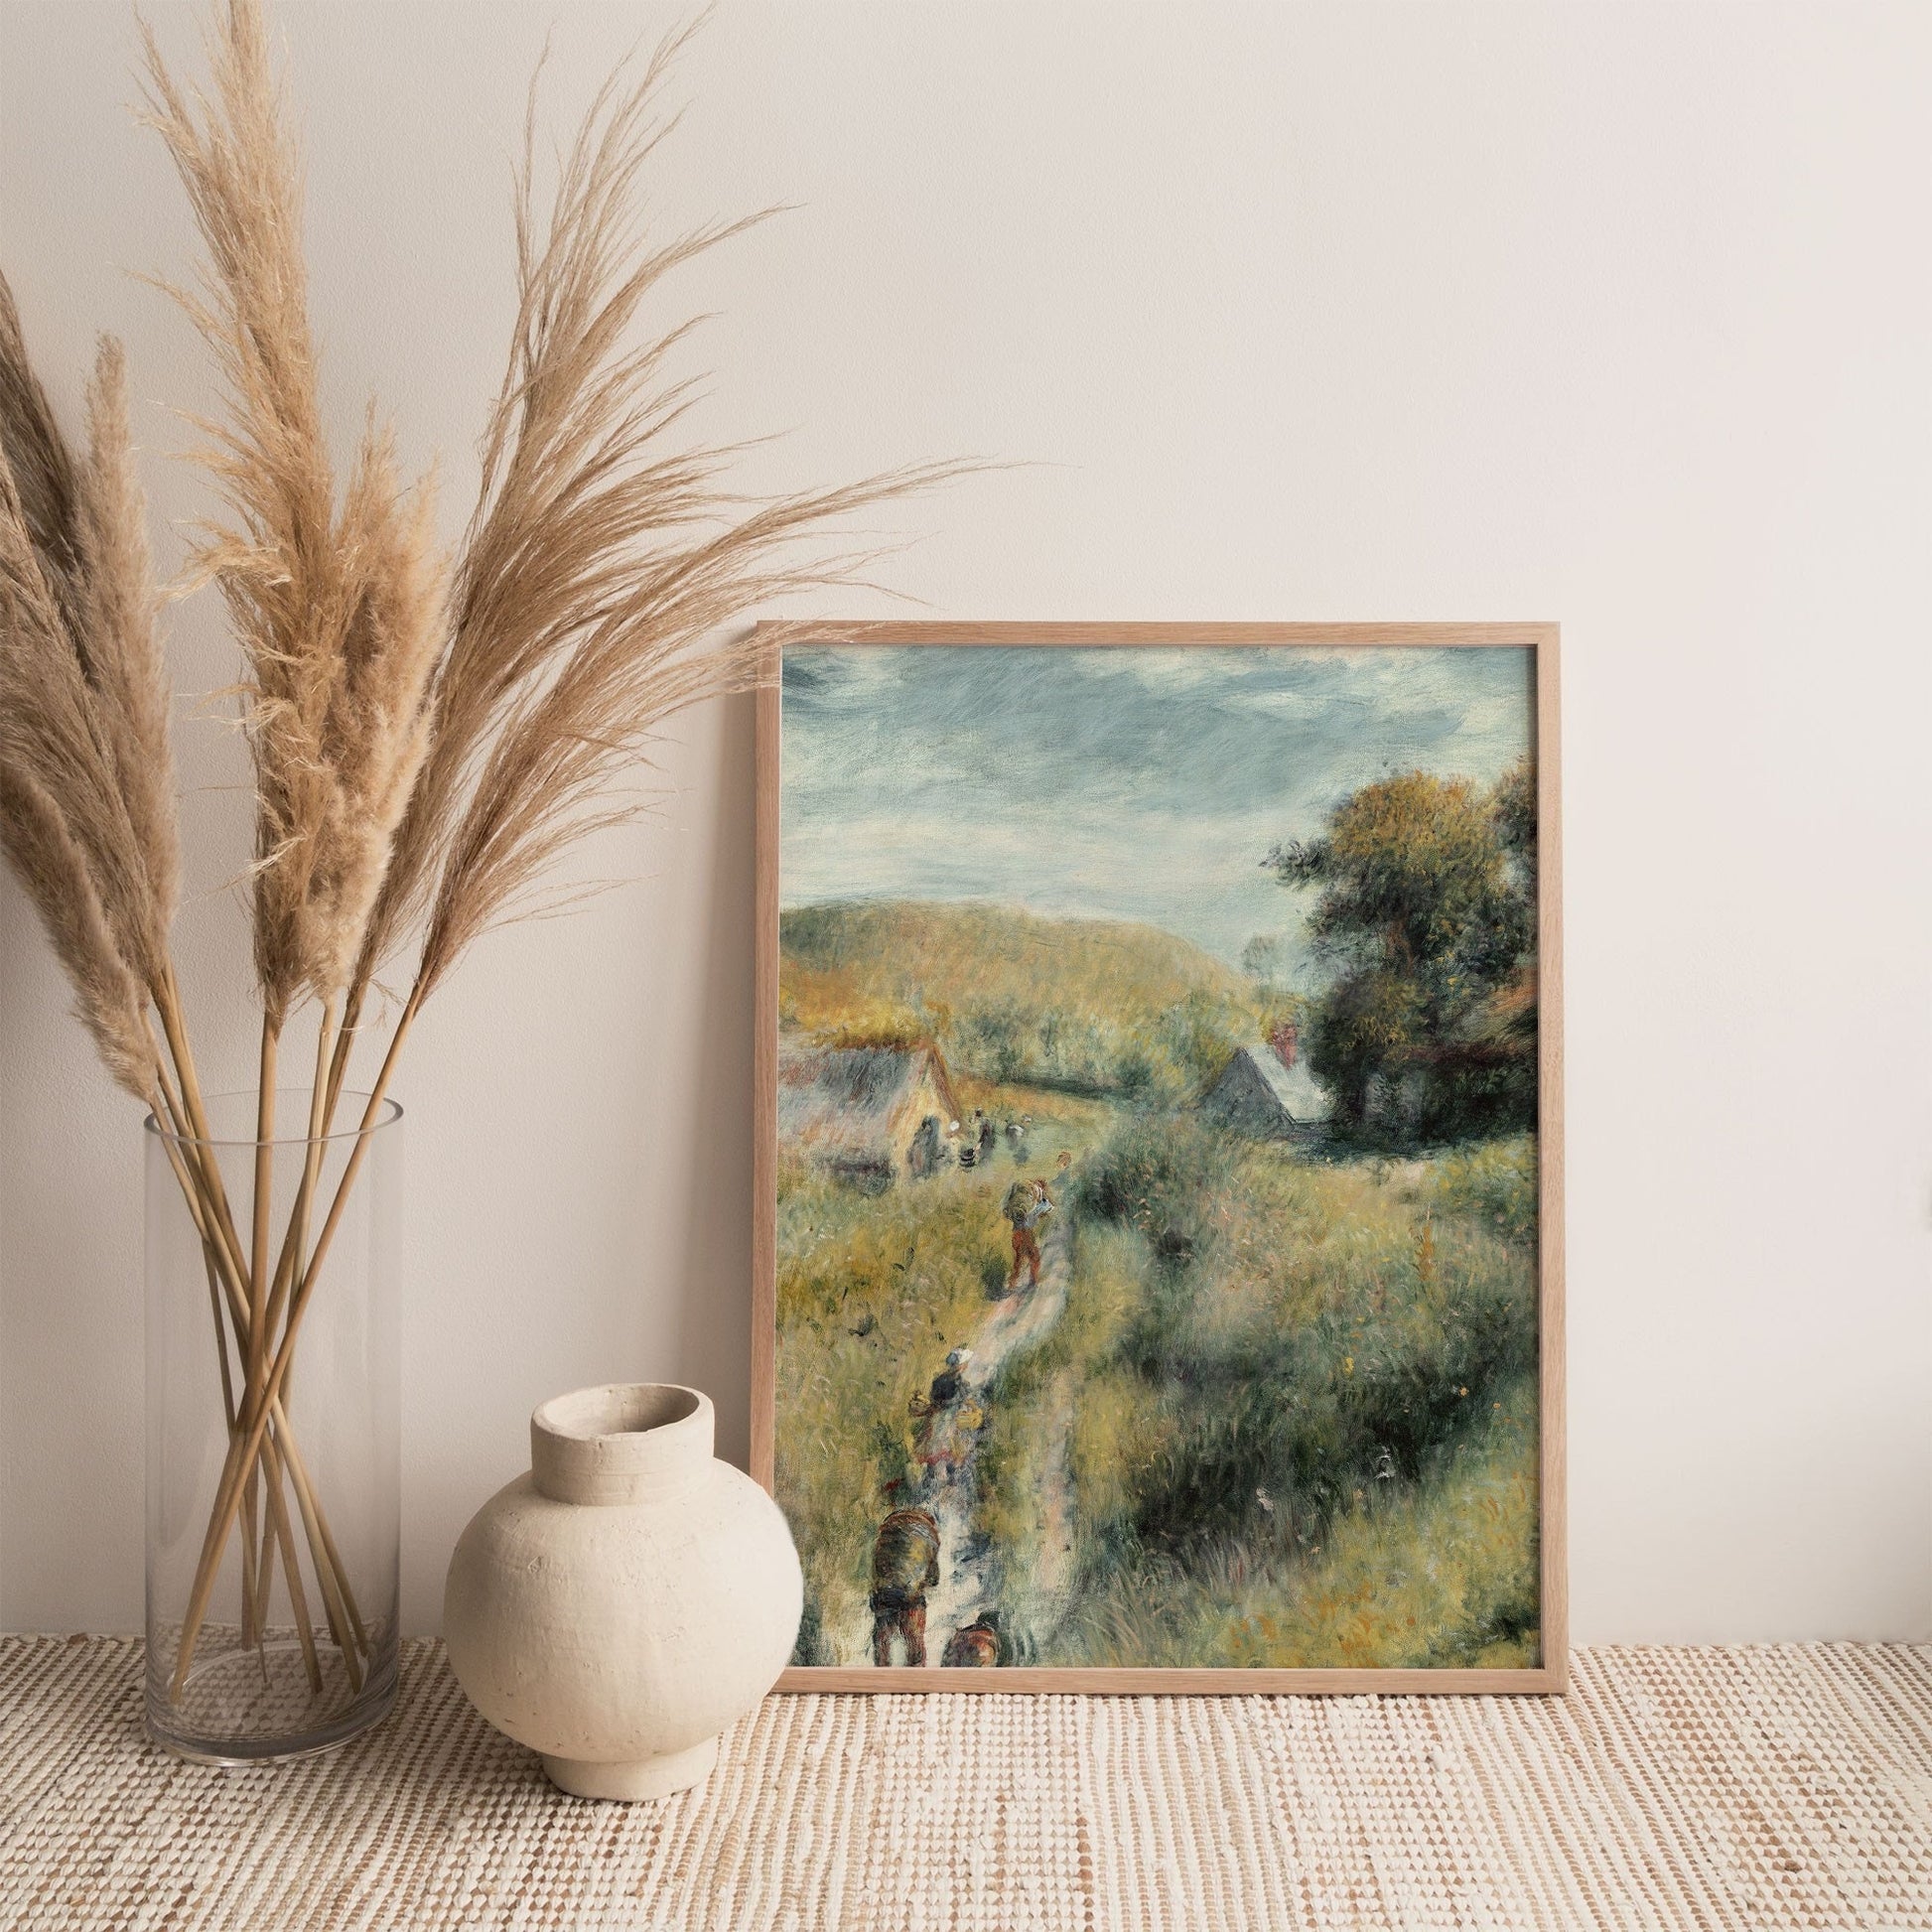 Printed Vintage Wall Art with Landscape Scenery 